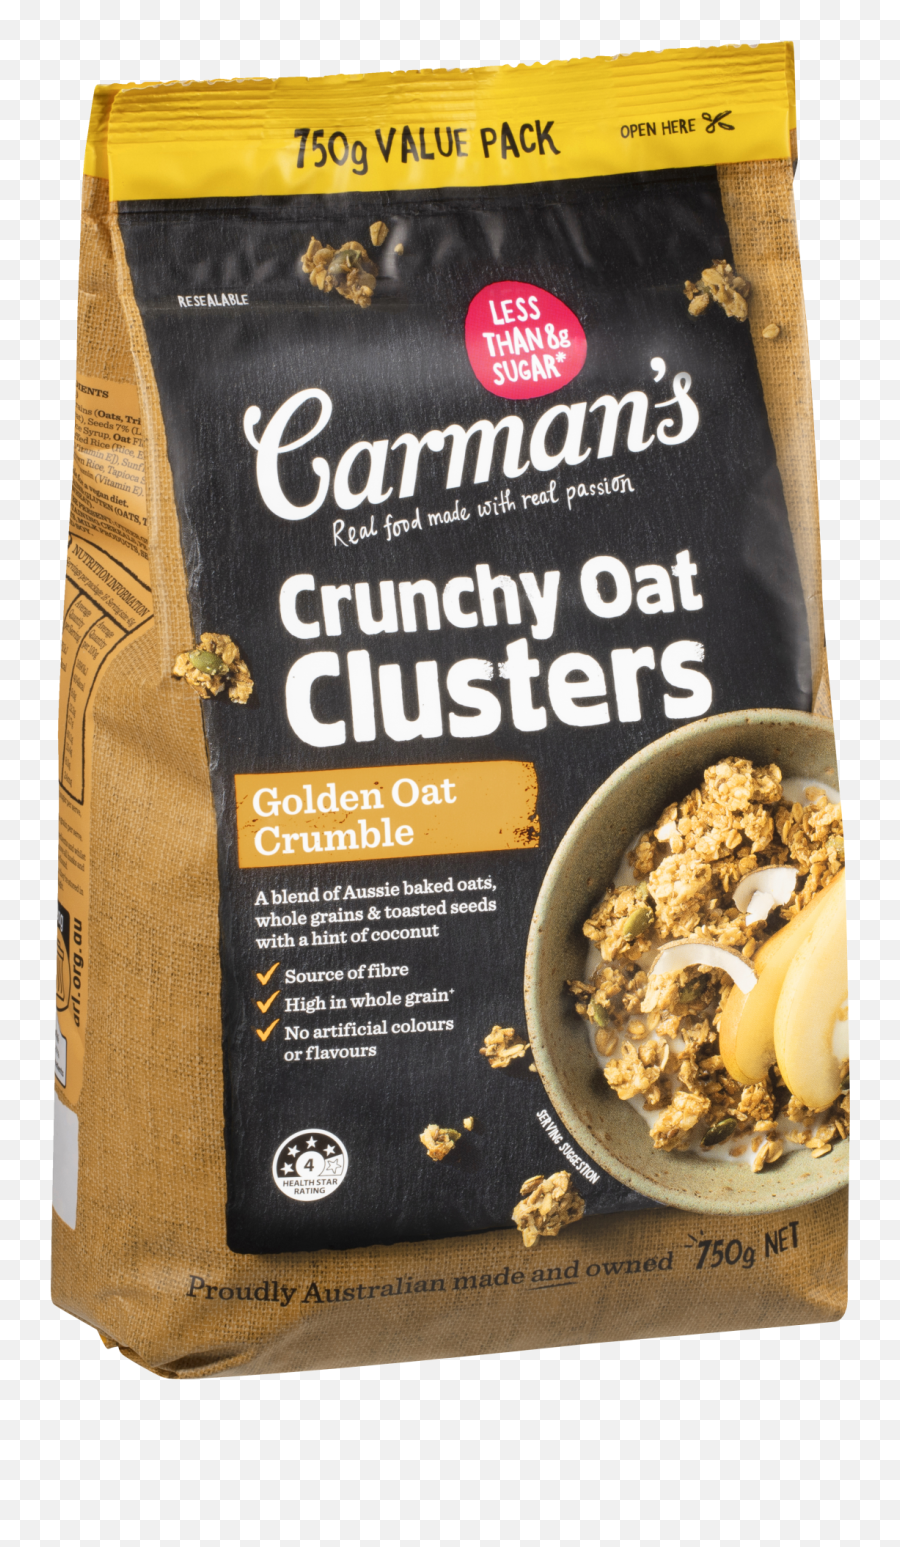 Golden Oat Crumble Crunchy Clusters Value Pack - Carmans Crunchy Oat Clusters Png,Crumbled Icon Pack